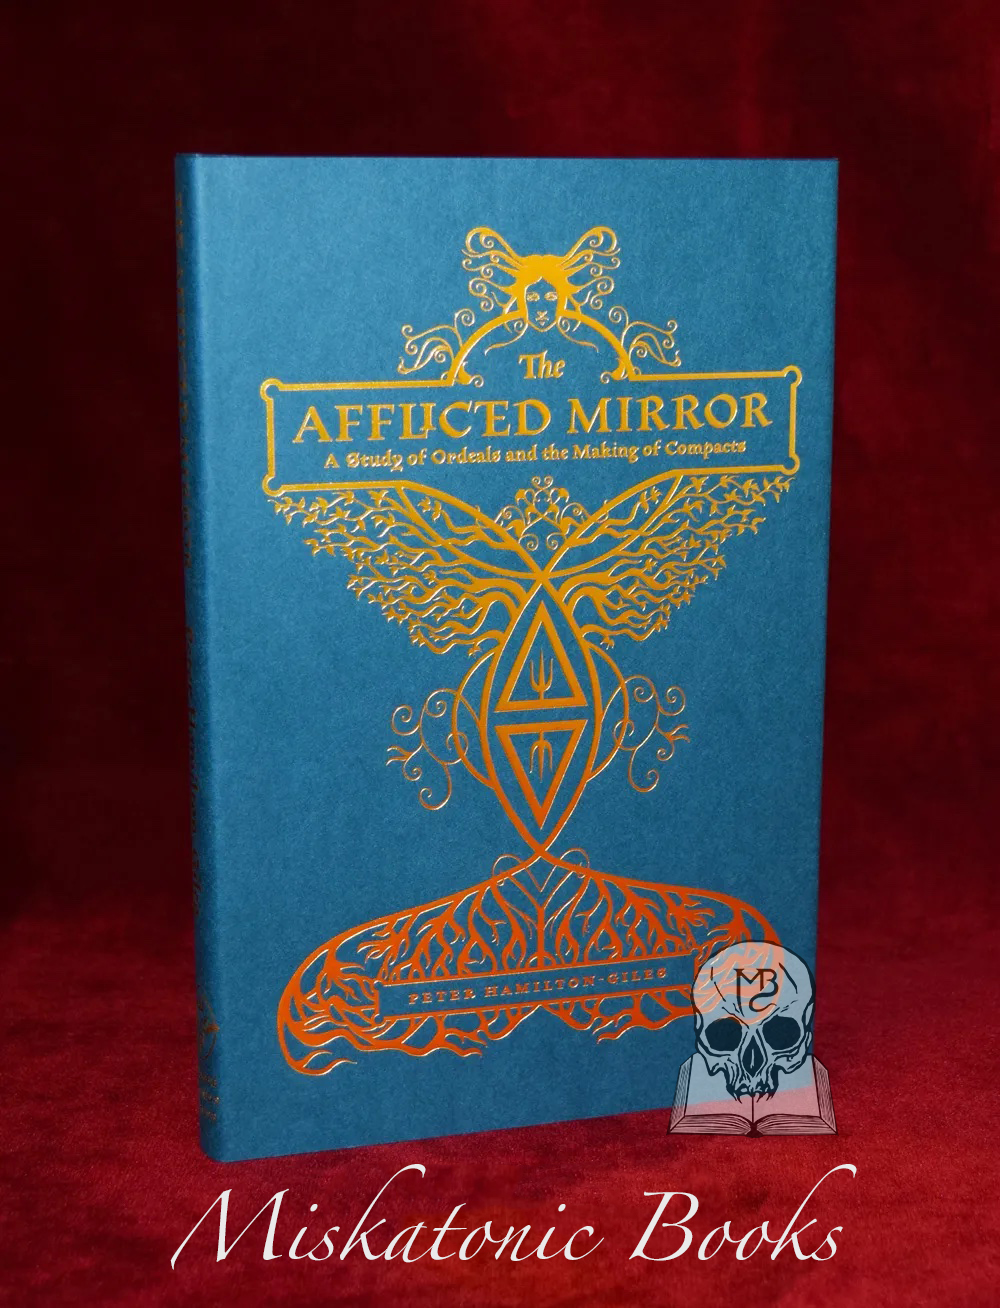 THE AFFLICTED MIRROR: A Study of Ordeals and the Making of Compacts by Peter Hamilton-Giles - Limited Edition Hardcover